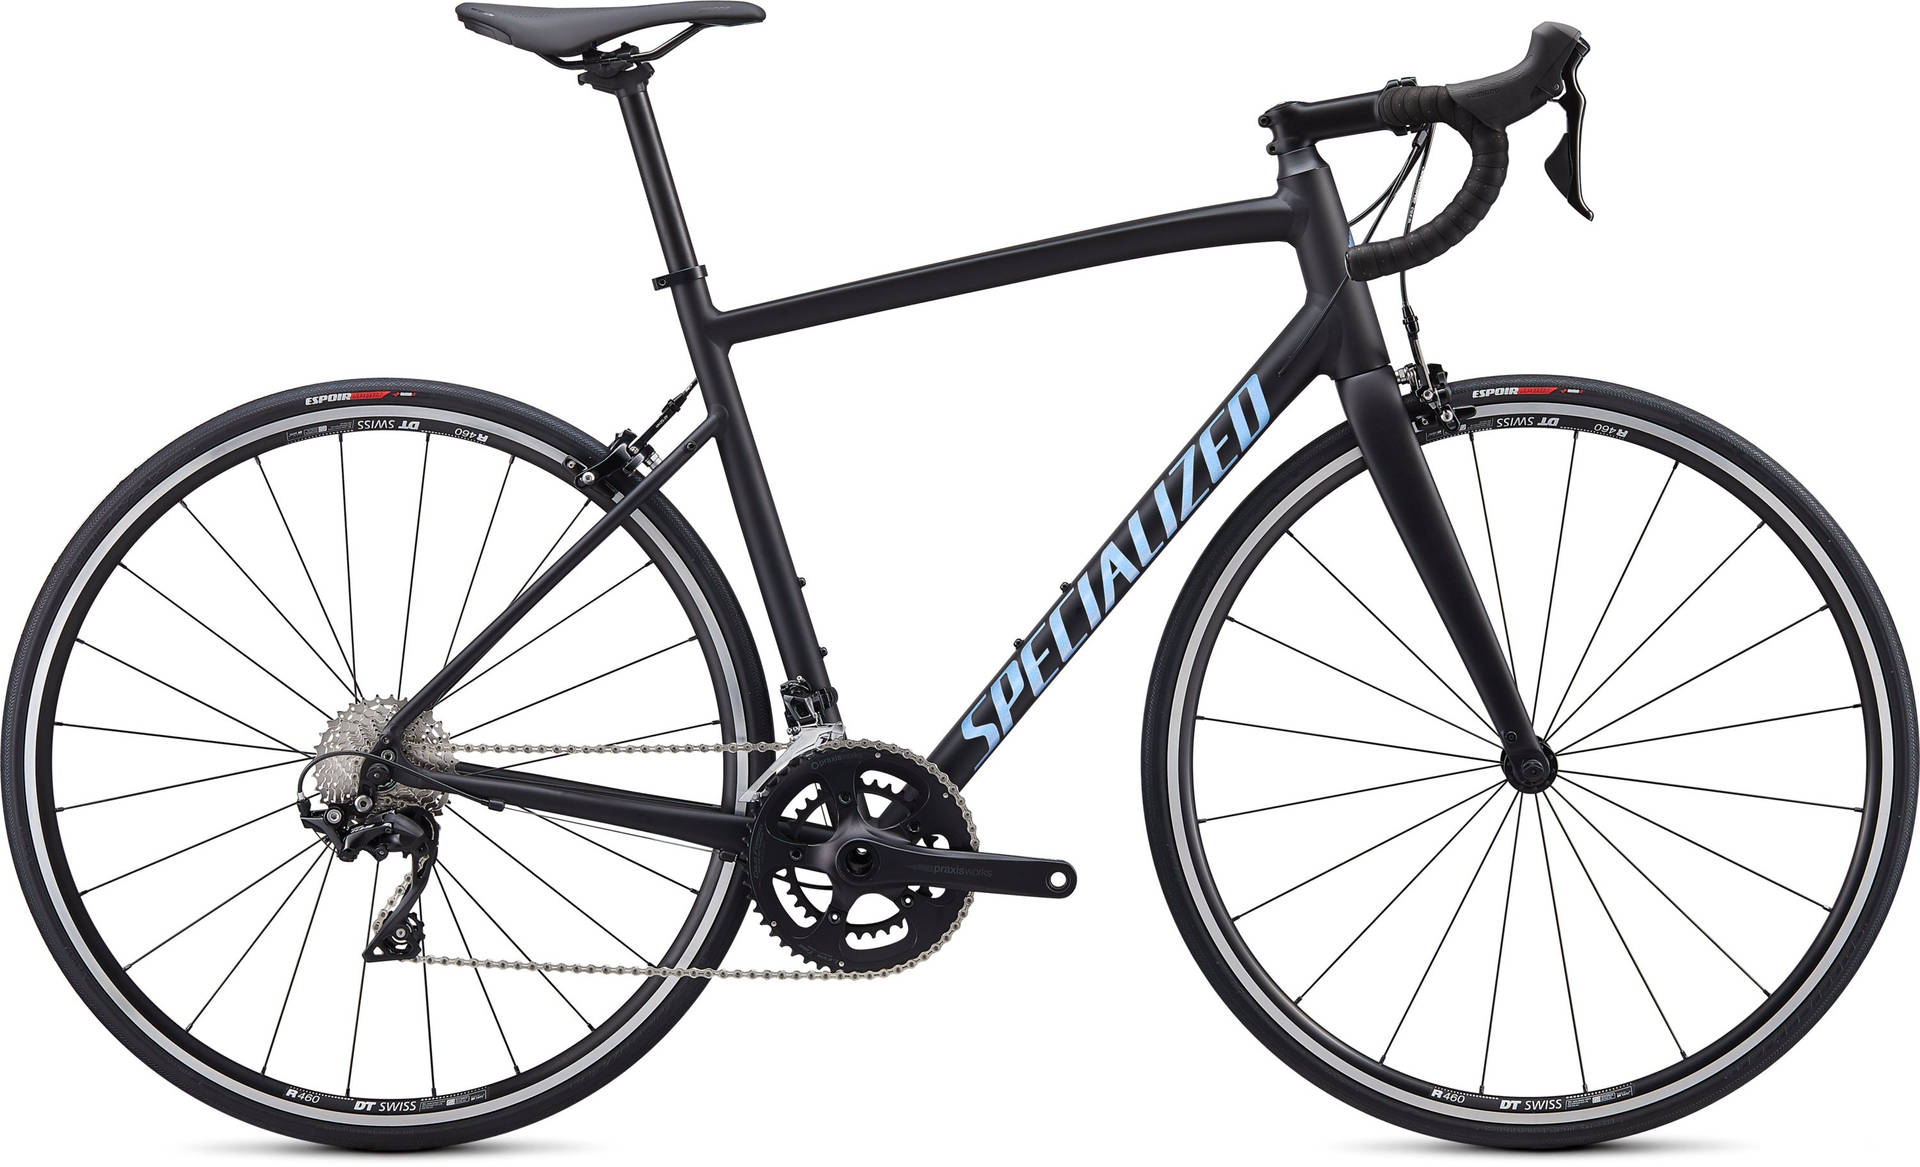 High-performance Specialized Bike in Black and Silver Blue Wallpaper